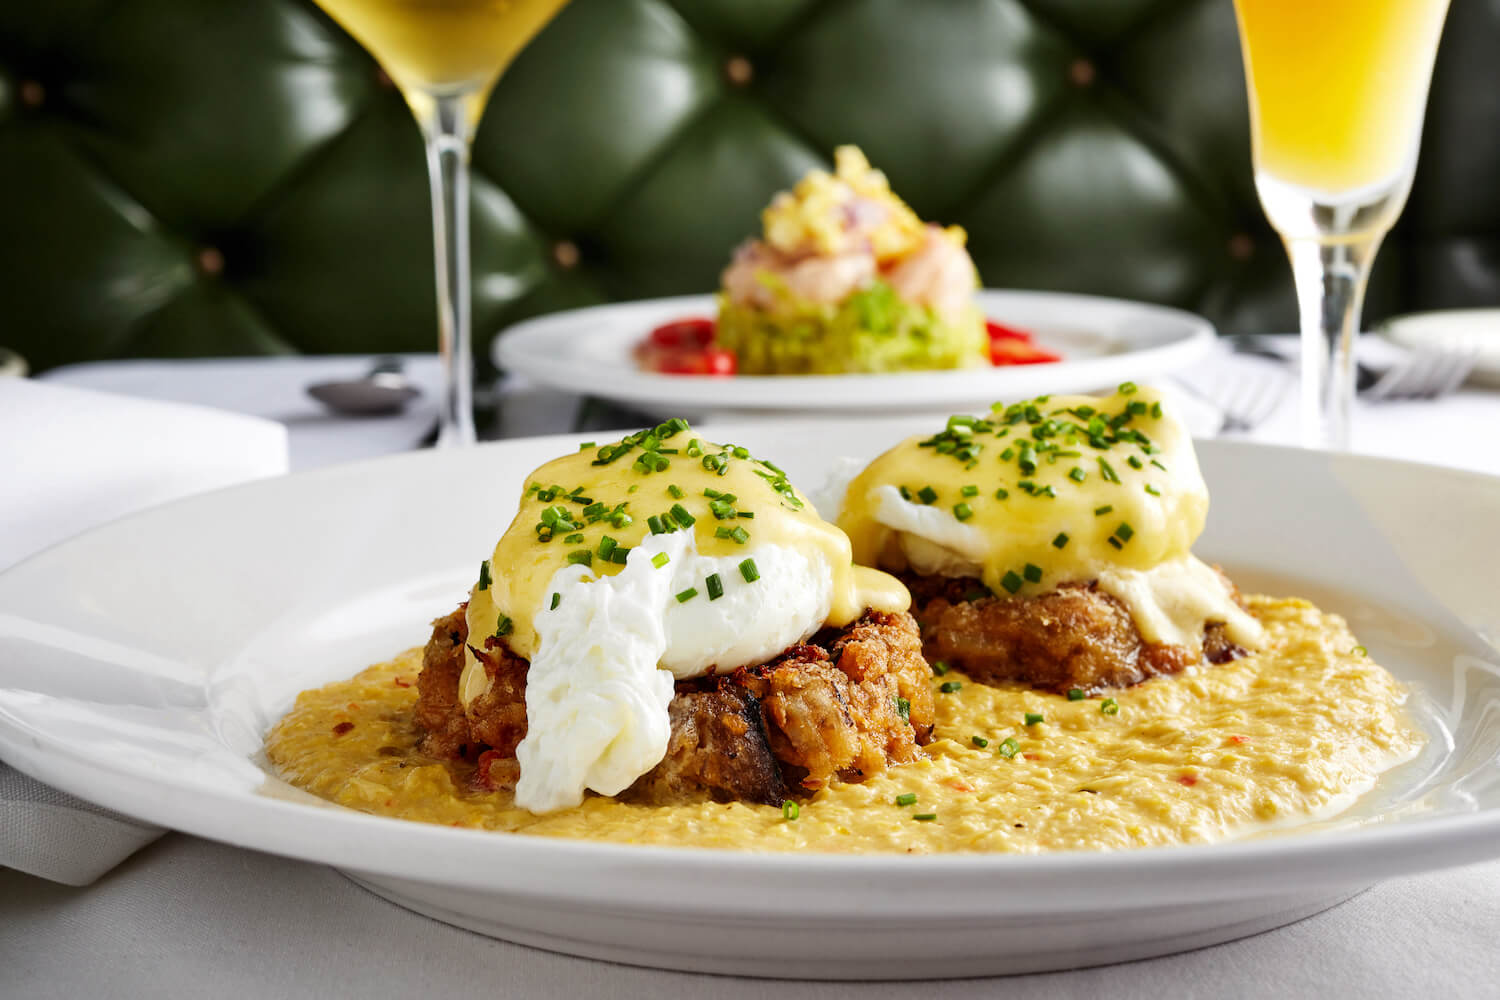 Where to Dine During Lent Season in New Orleans